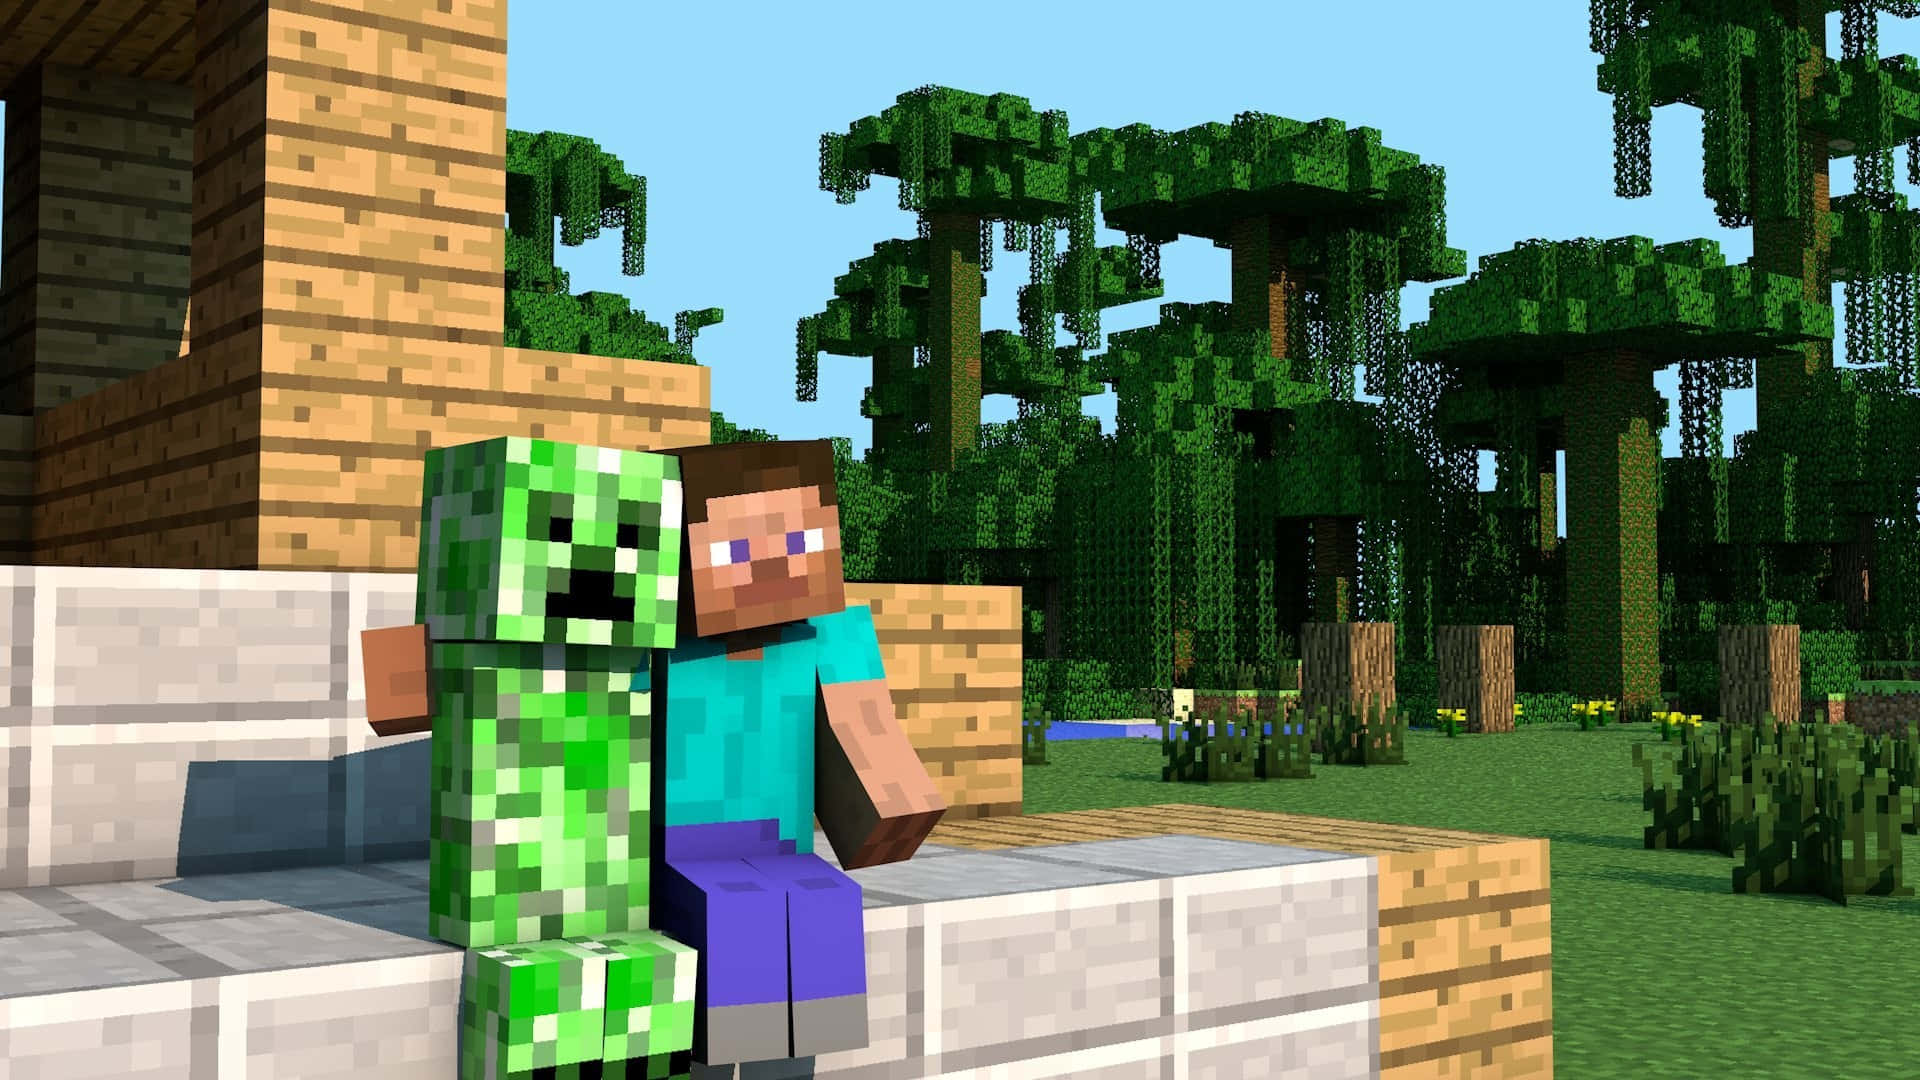 A Man And A Woman Sitting On A Bench In Minecraft